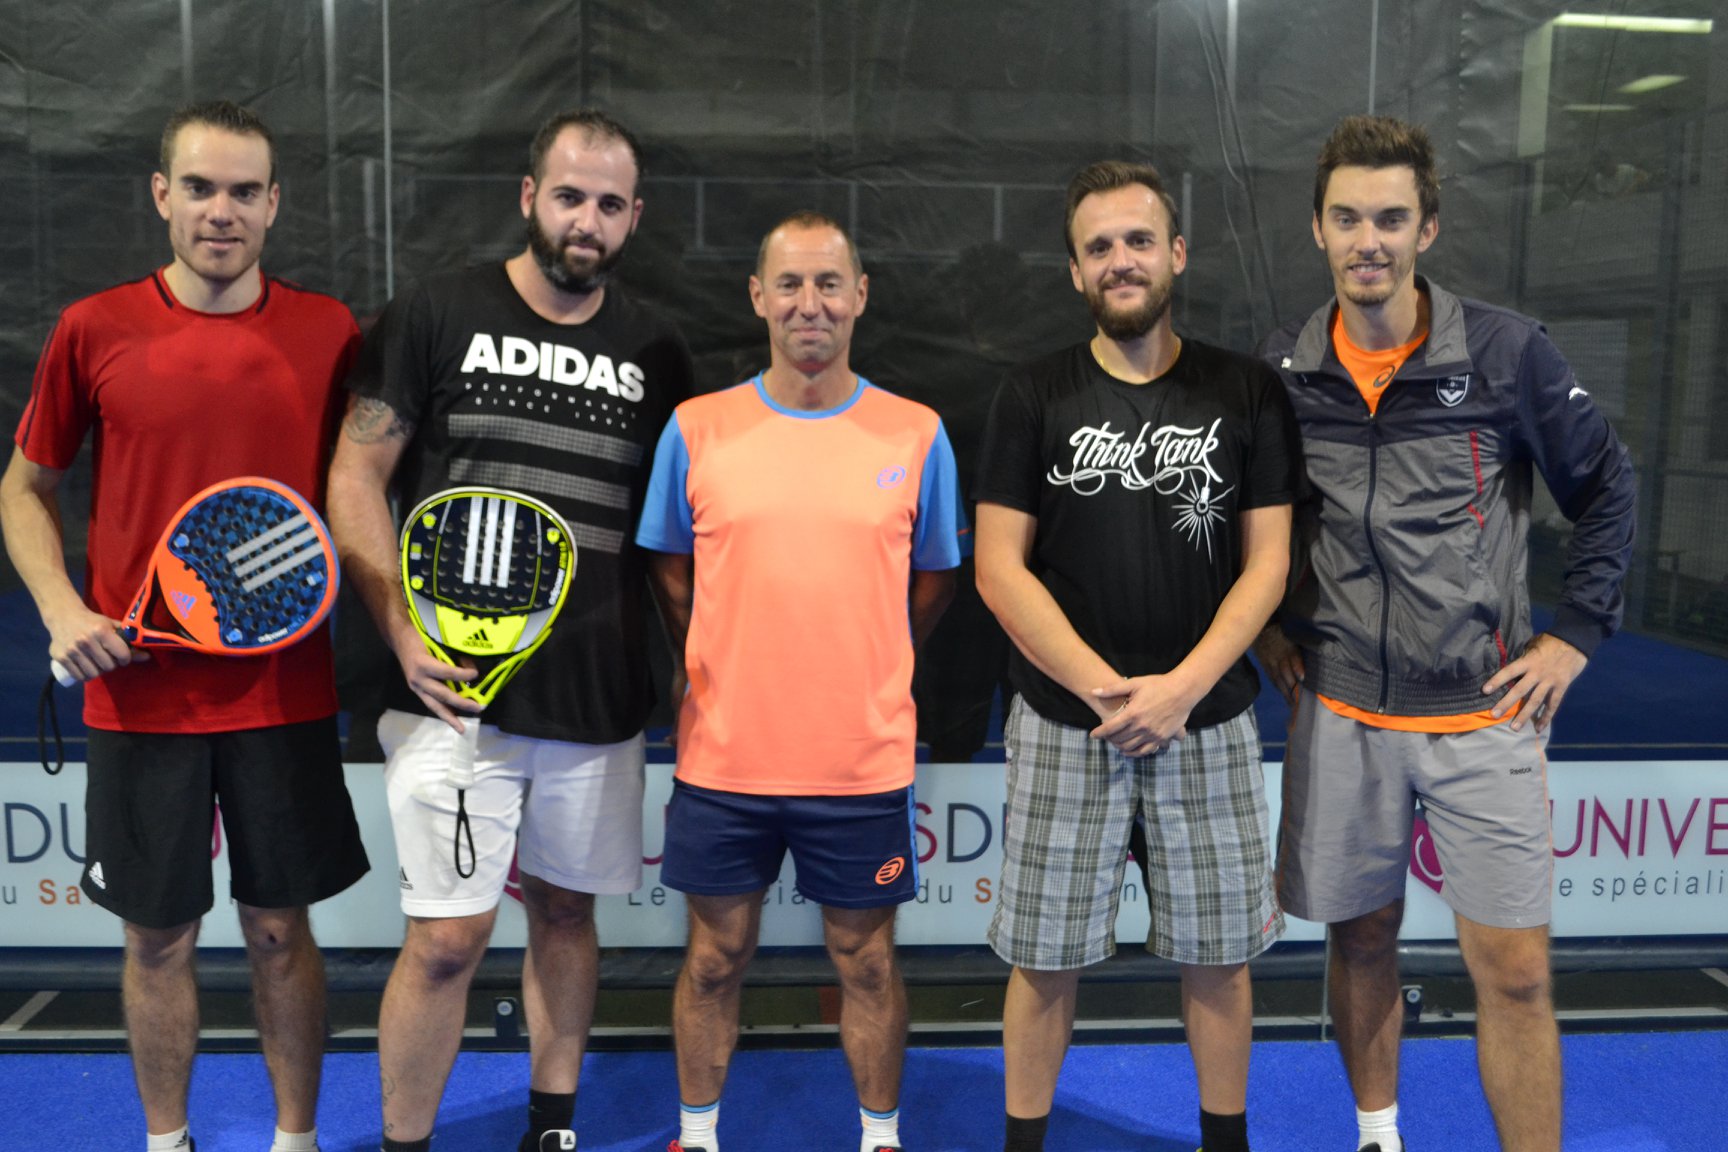 The Open Padel Horizon is coming to an end